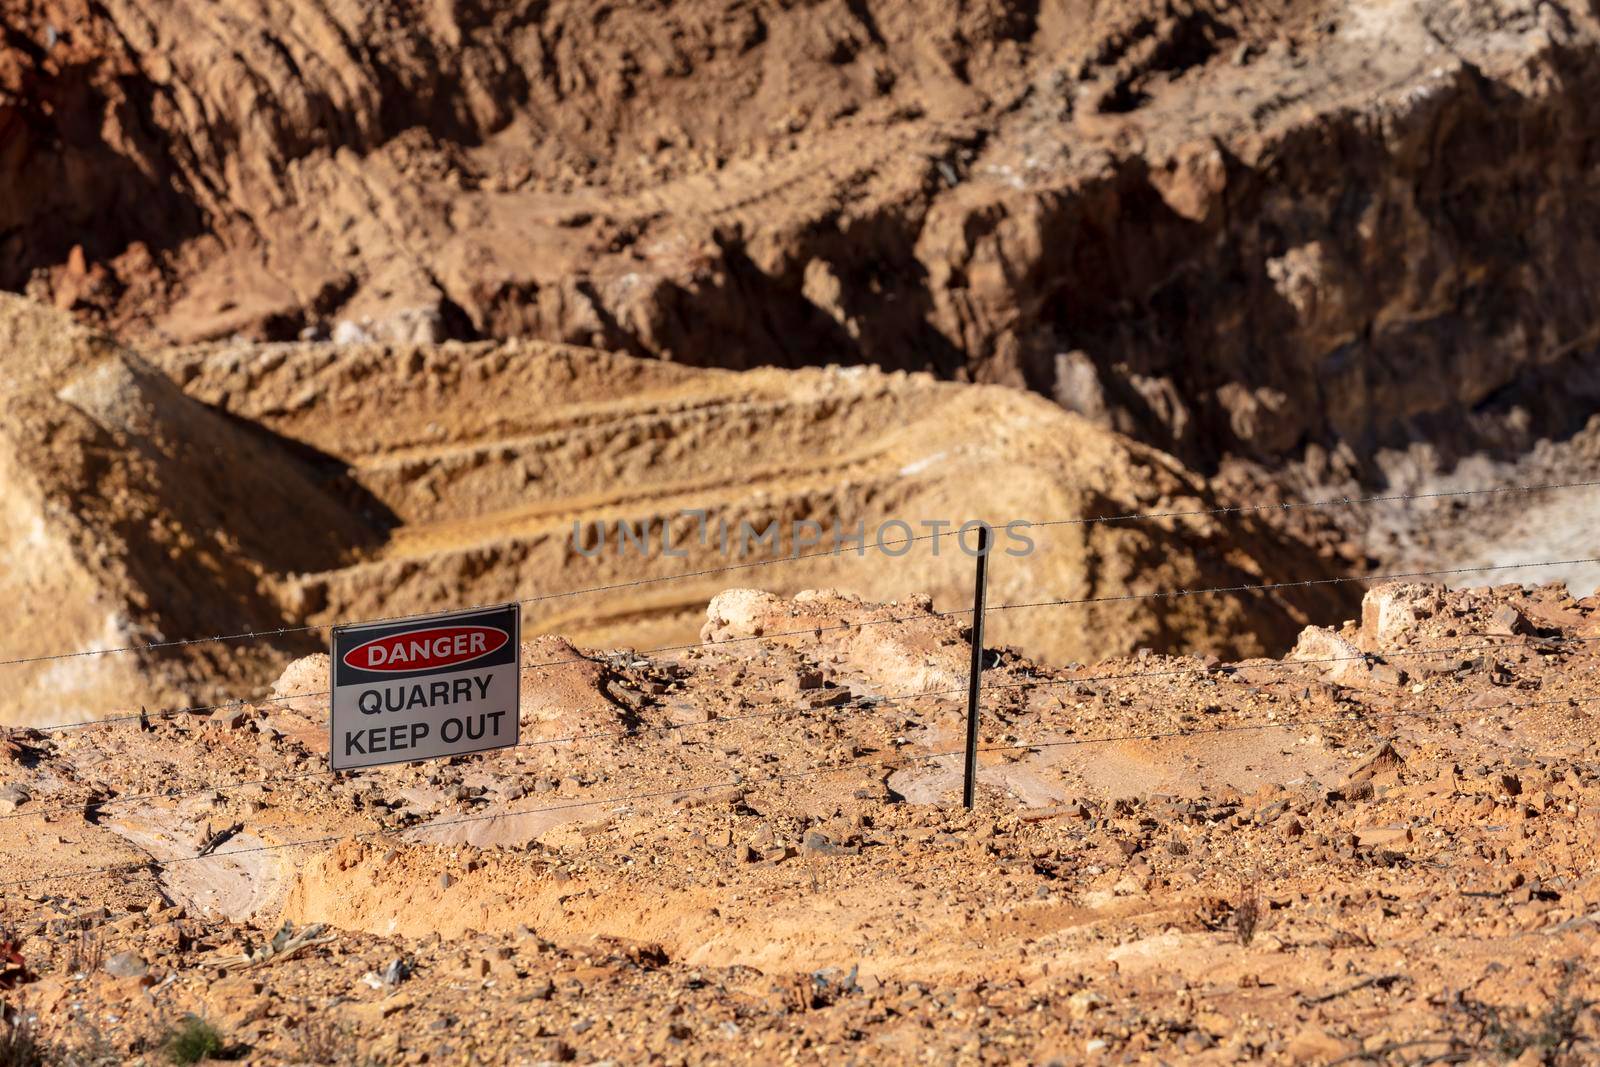 Photograph of a keep out danger sign in a large quarry by WittkePhotos